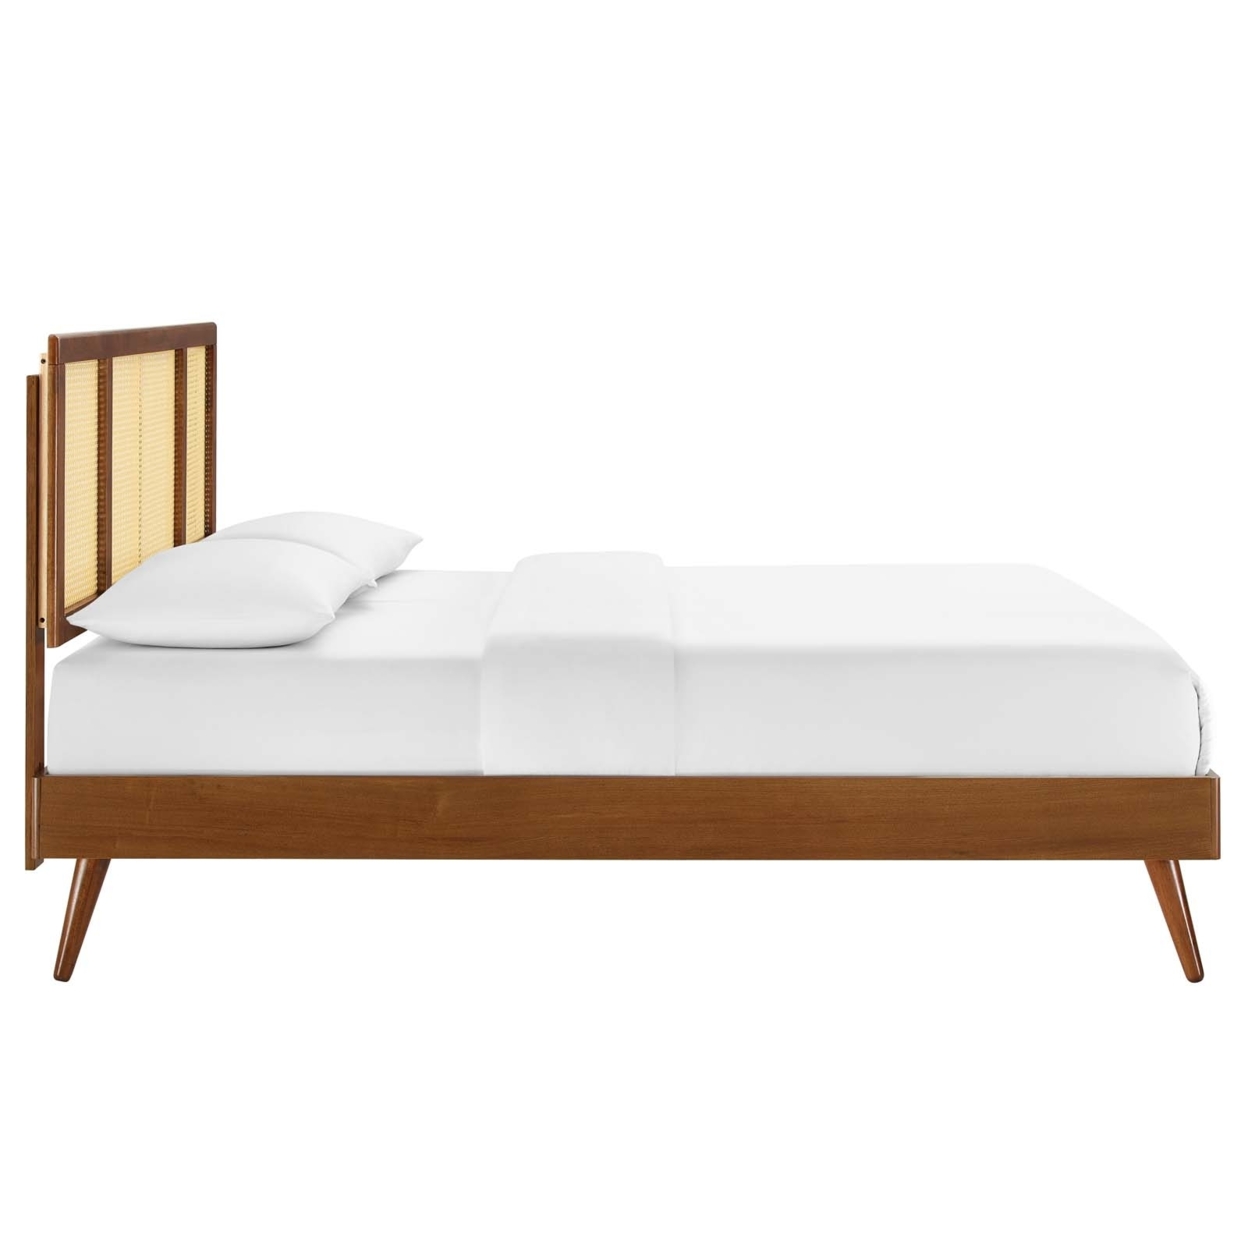 Kelsea Cane And Wood Full Platform Bed With Splayed Legs, Walnut